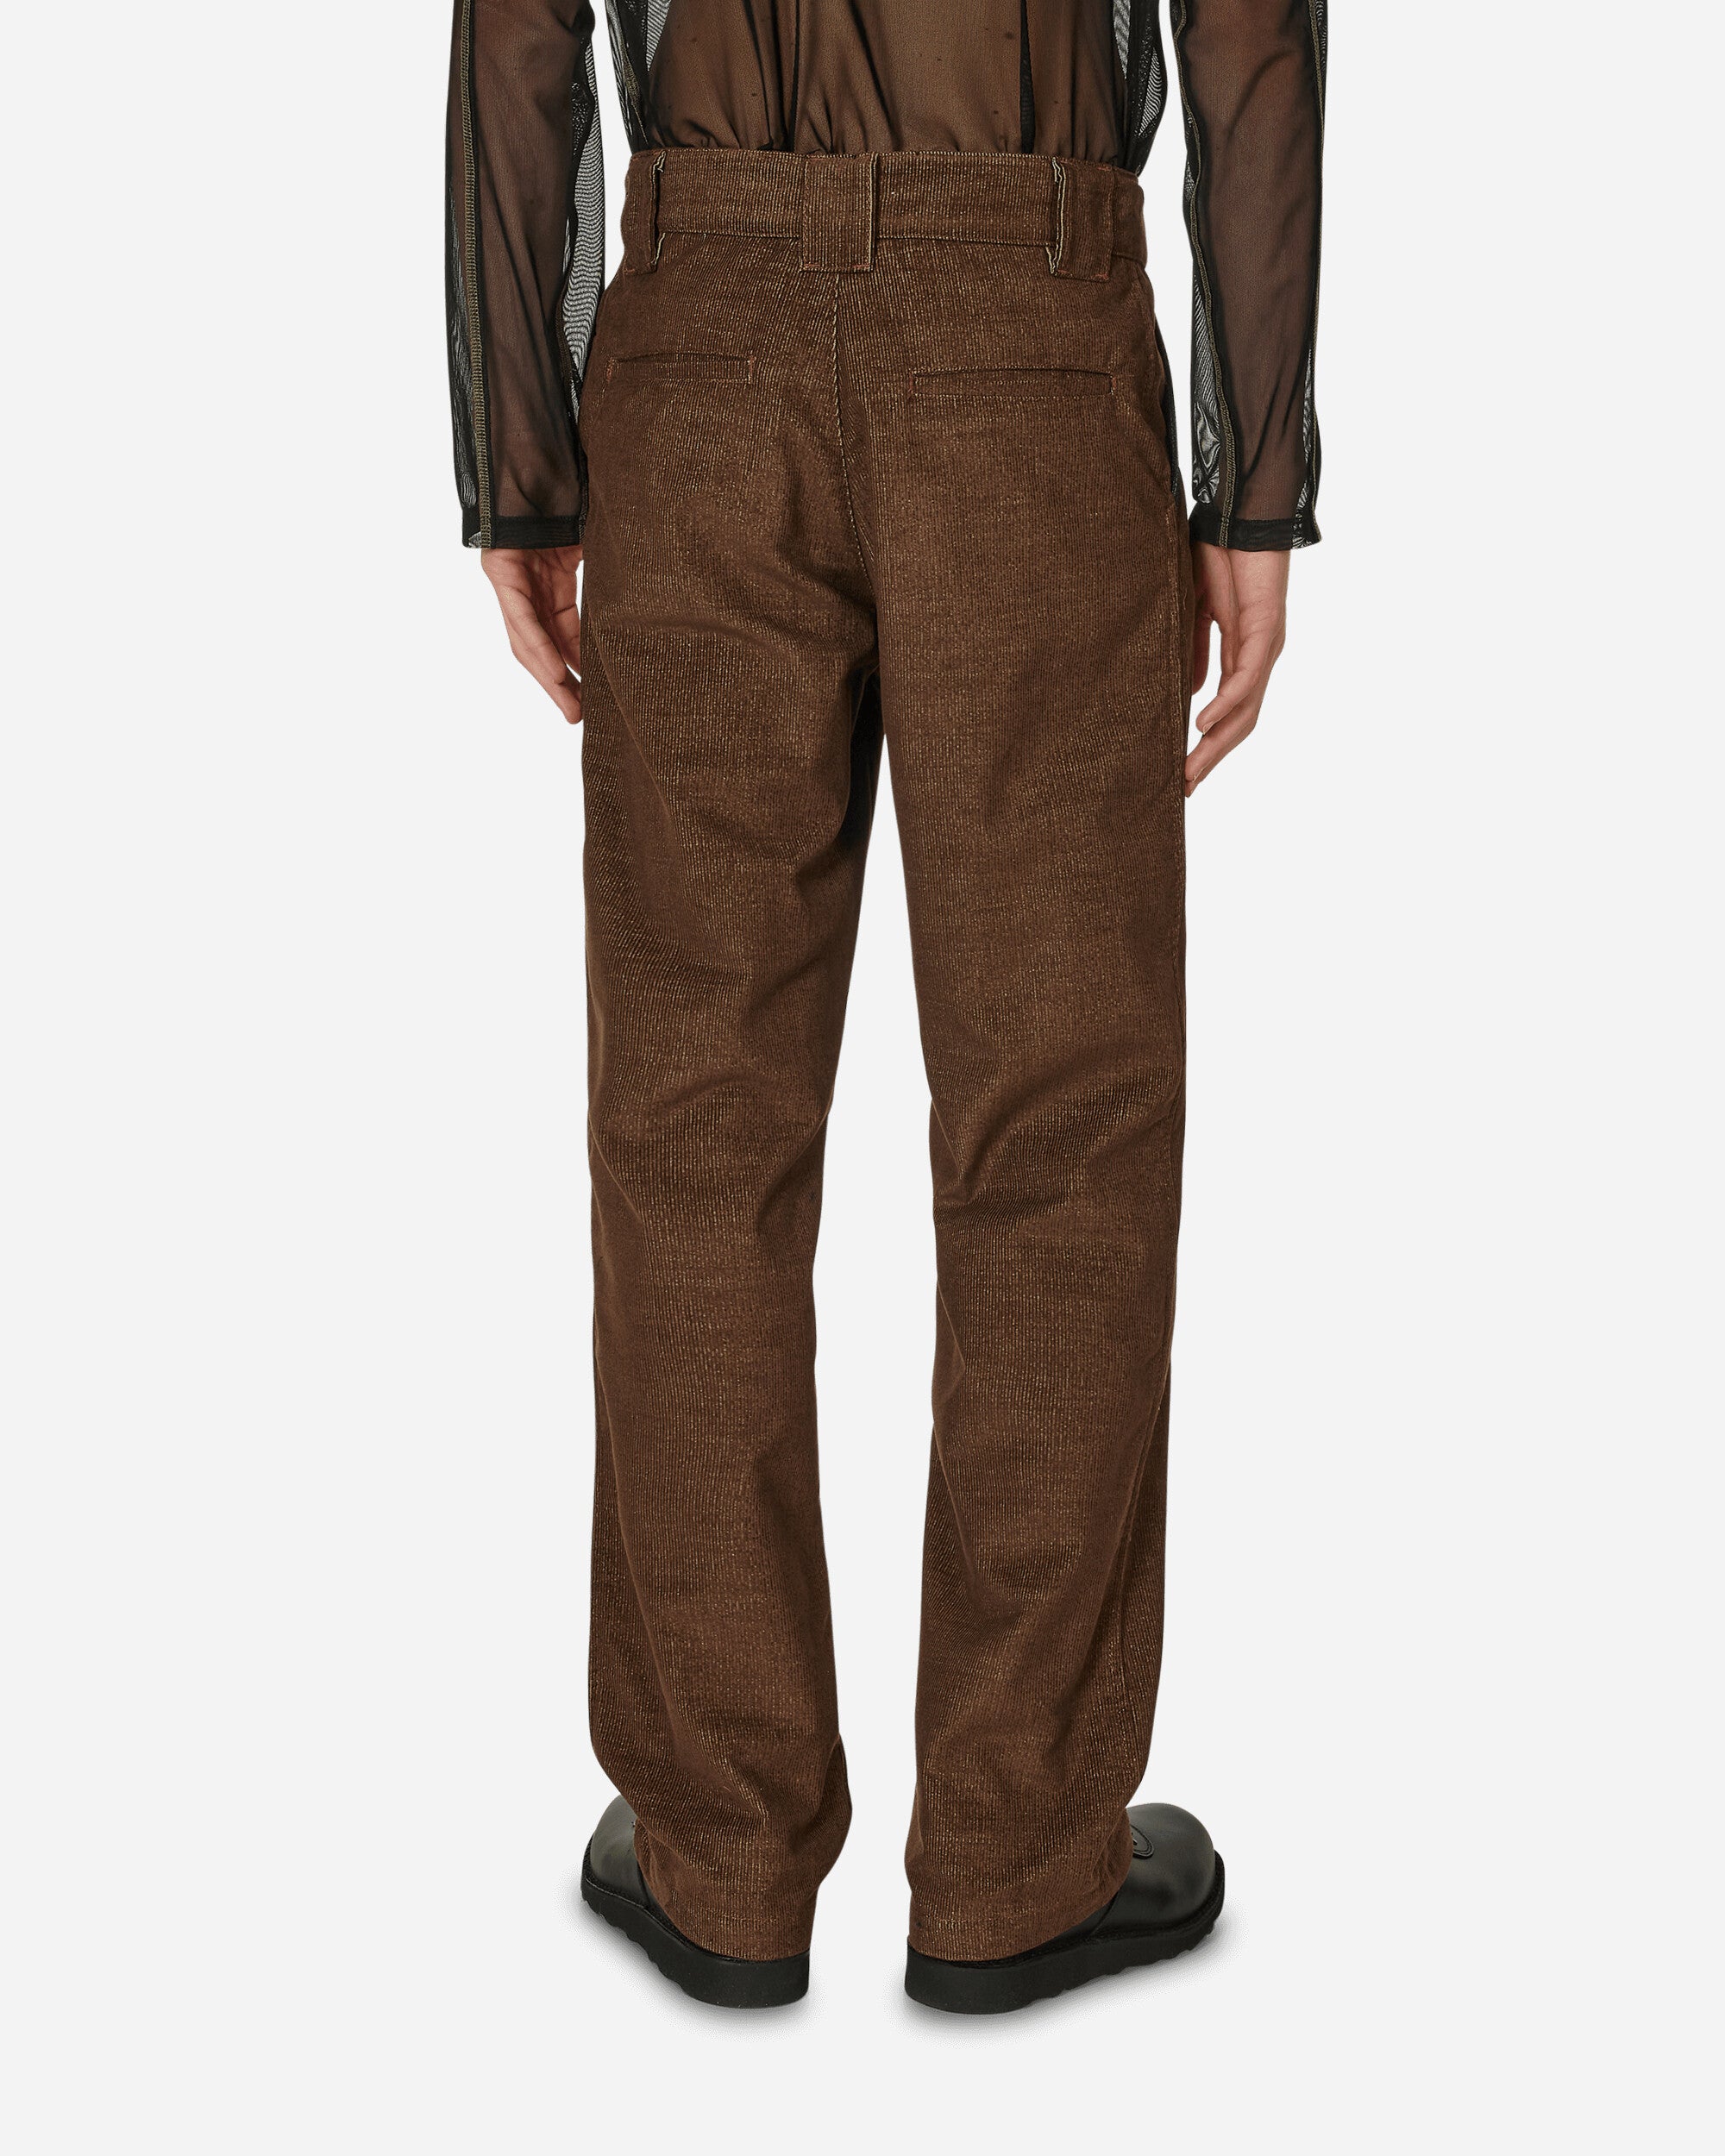 AFFXWRKS Advance Pant Rust Brown Pants Casual SS24TR07 RUBR